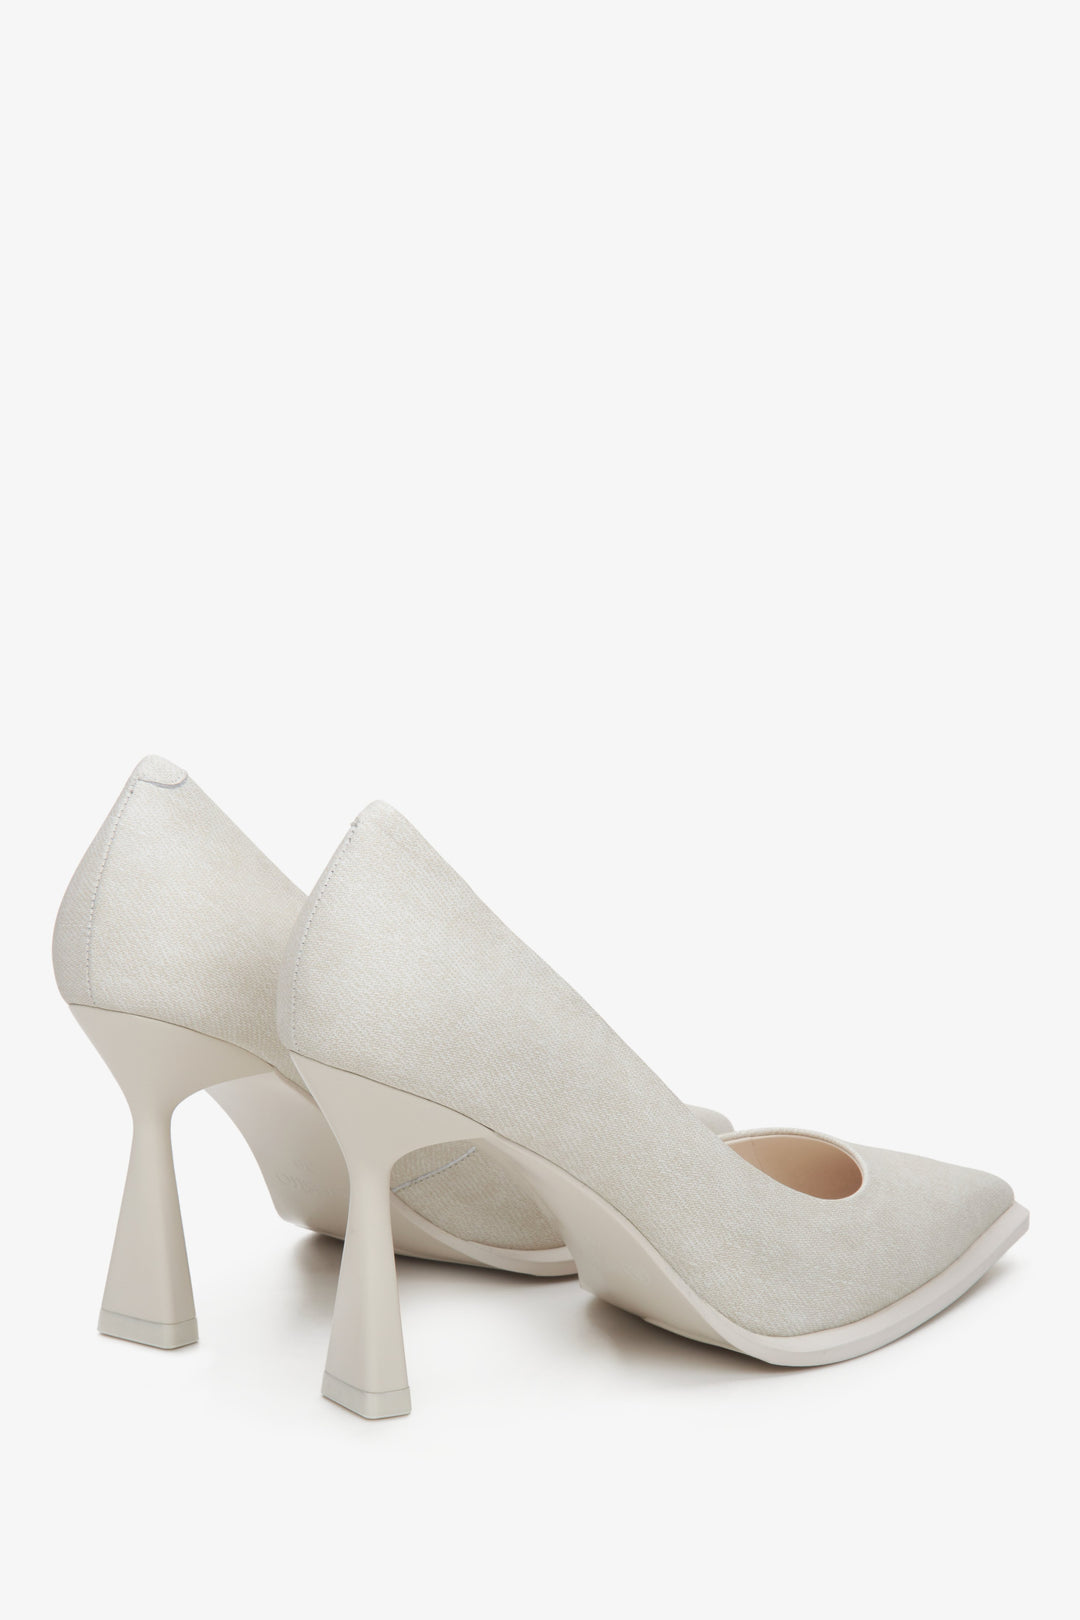 Women's light beige denim pumps by Estro - close-up on the heel and side line of the shoes.